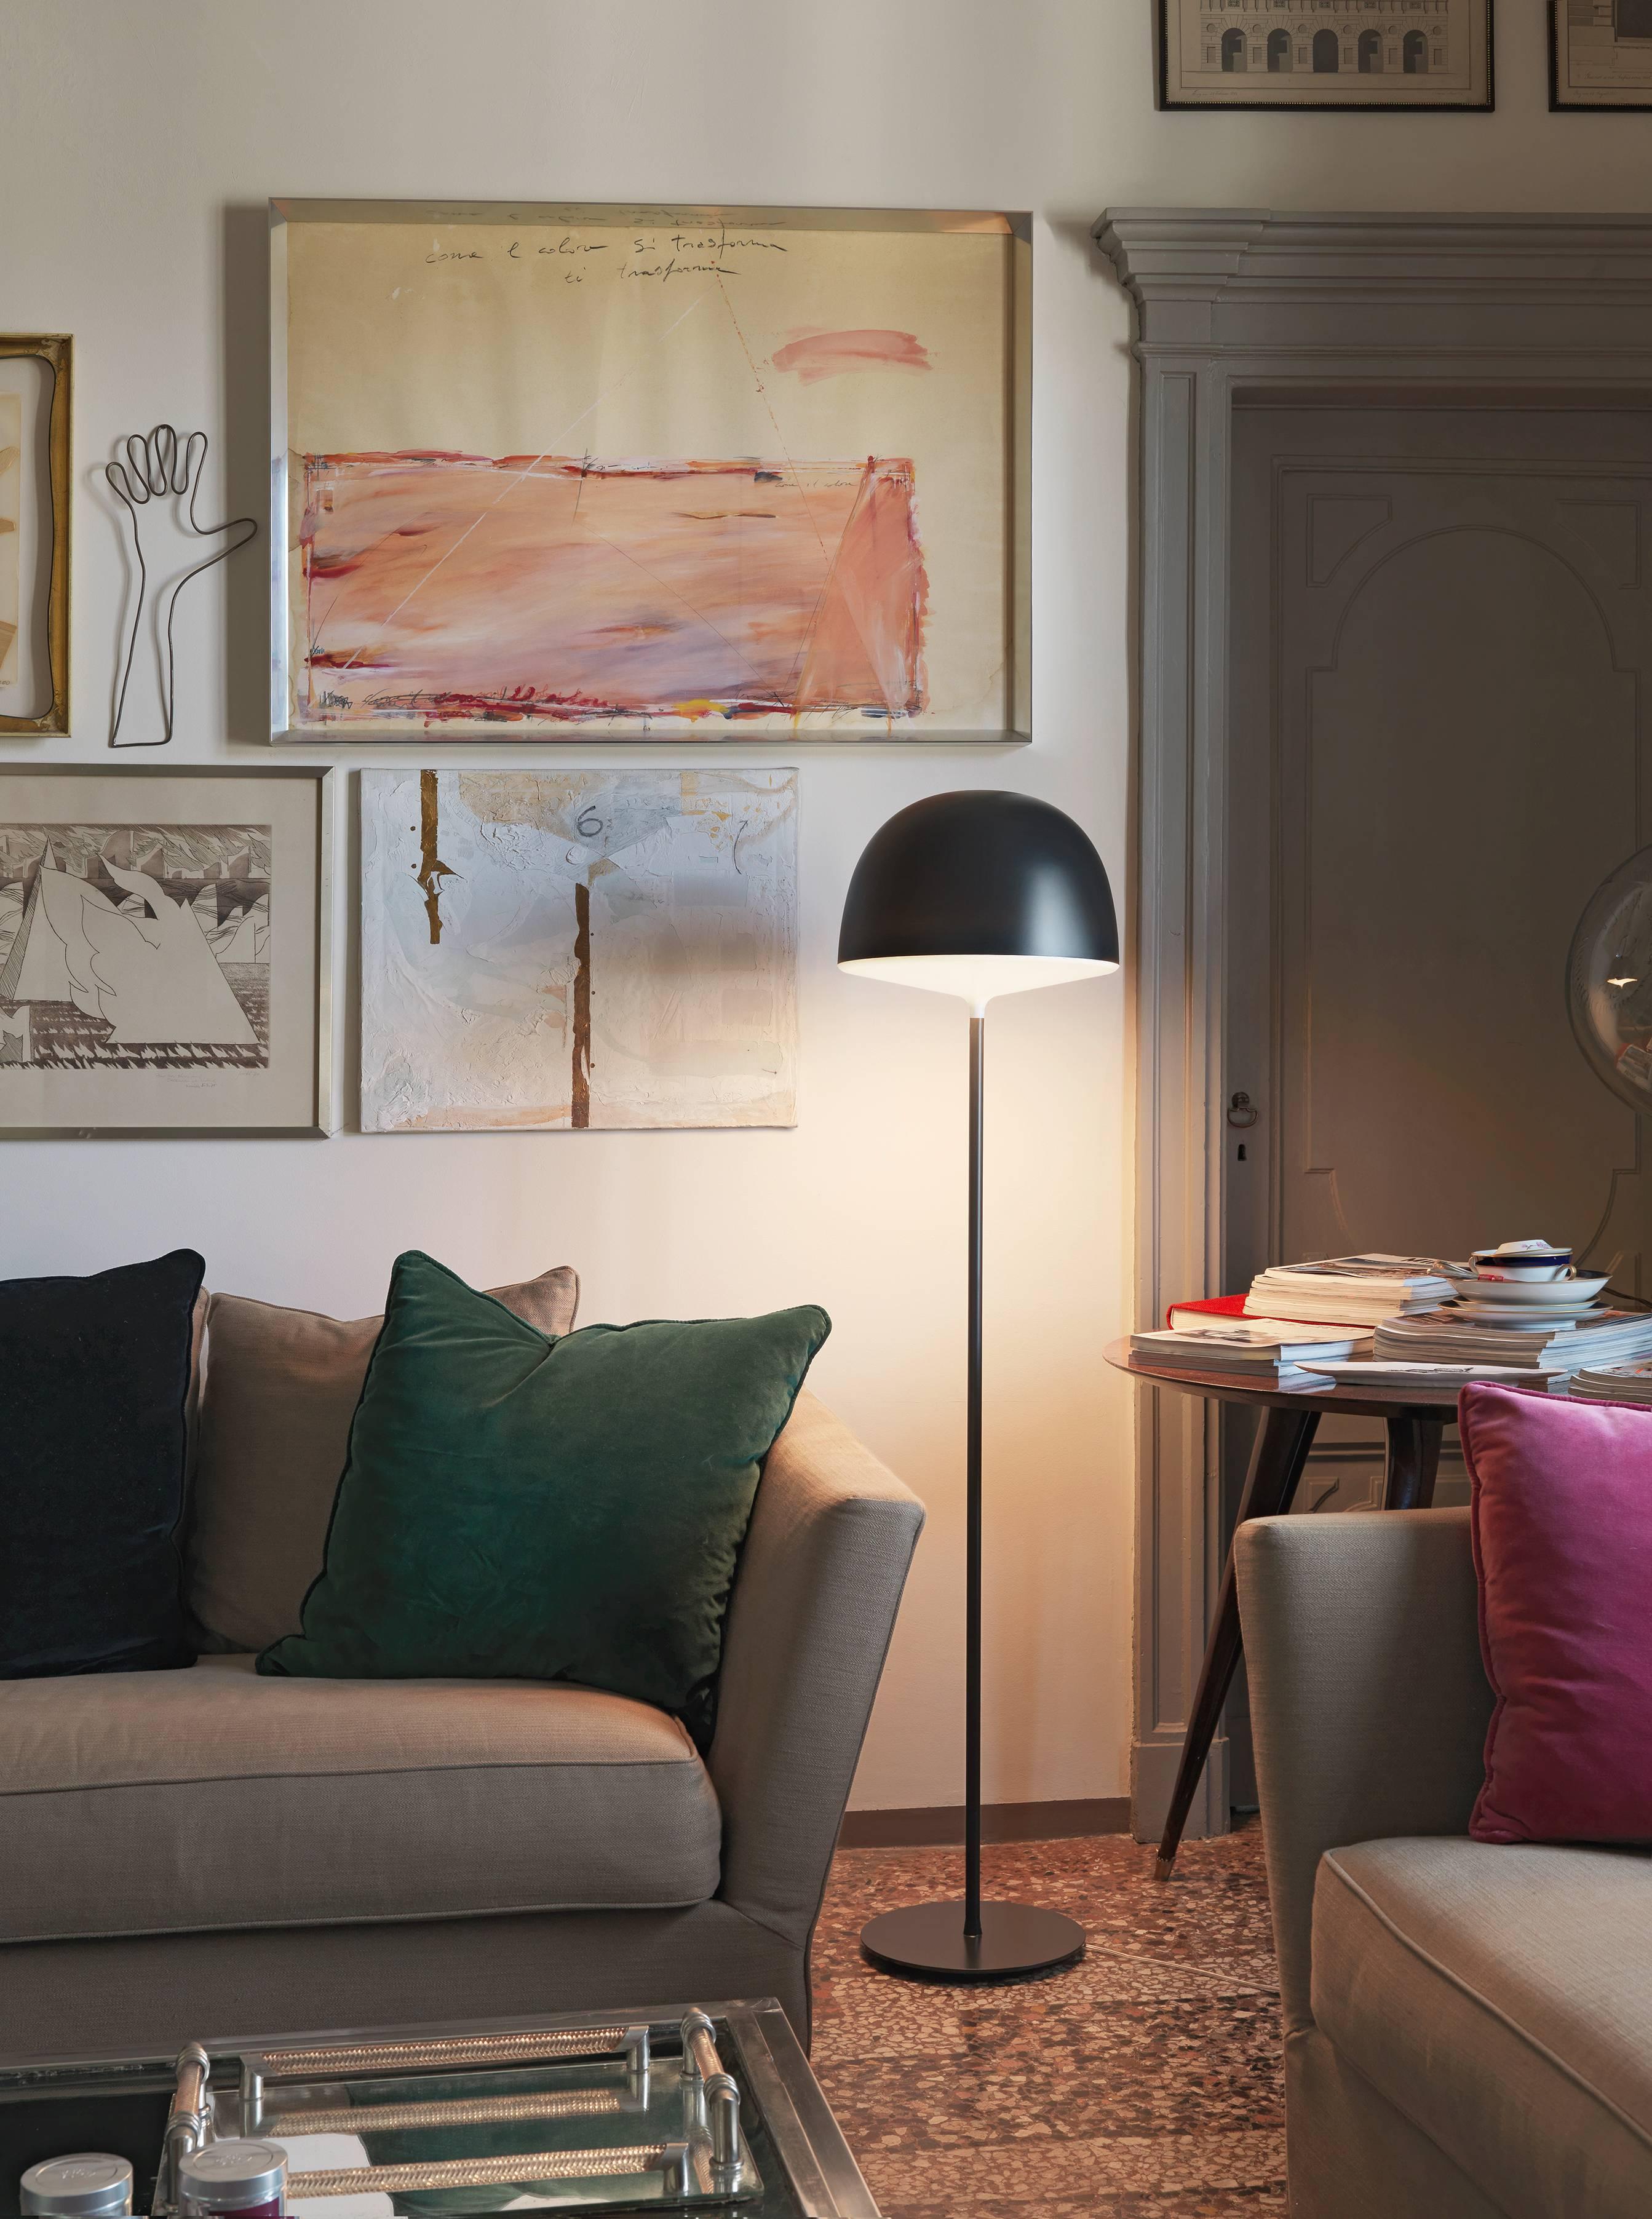 It echoes the studio’s Nordic imprint in its simplicity and functional aspects. The opaline polycarbonate diffuser ensures soft lighting, while the colored ones spread the light downwards.

Floor lamp. Opal lower diffuser. Lampshade in